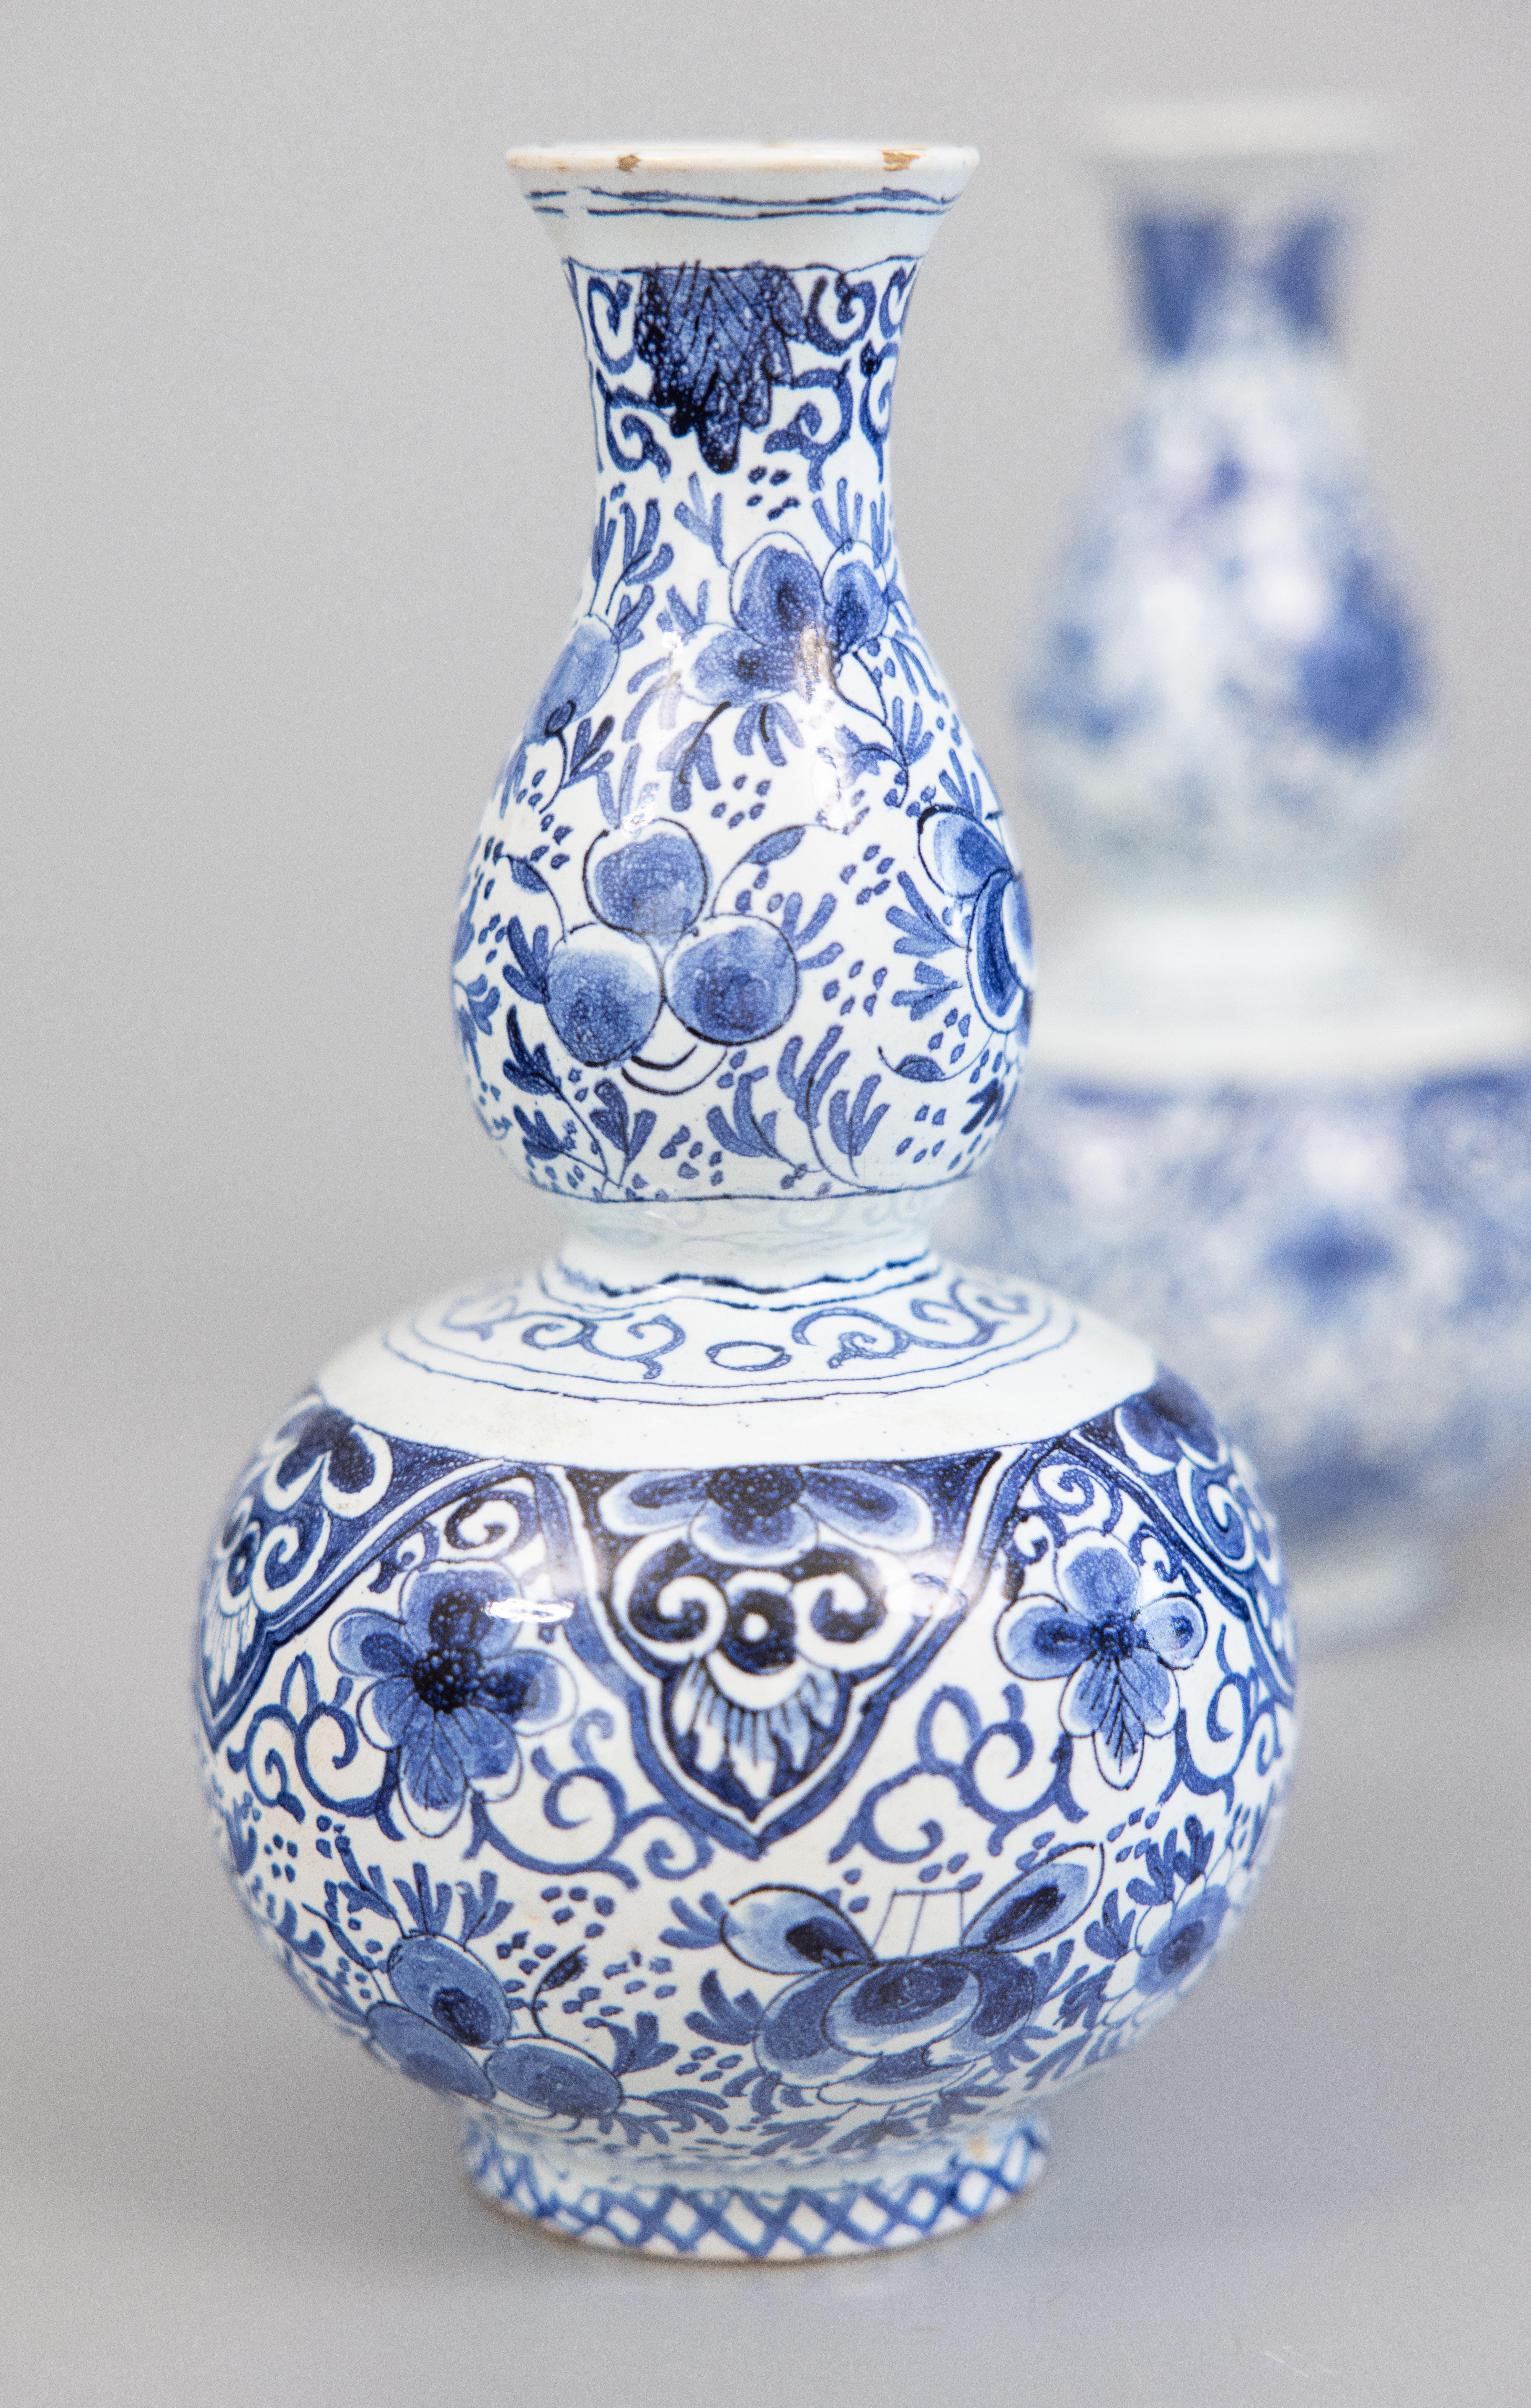 19th Century Pair of Antique Dutch Delft Faience Double Gourd Vases, circa 1800 For Sale